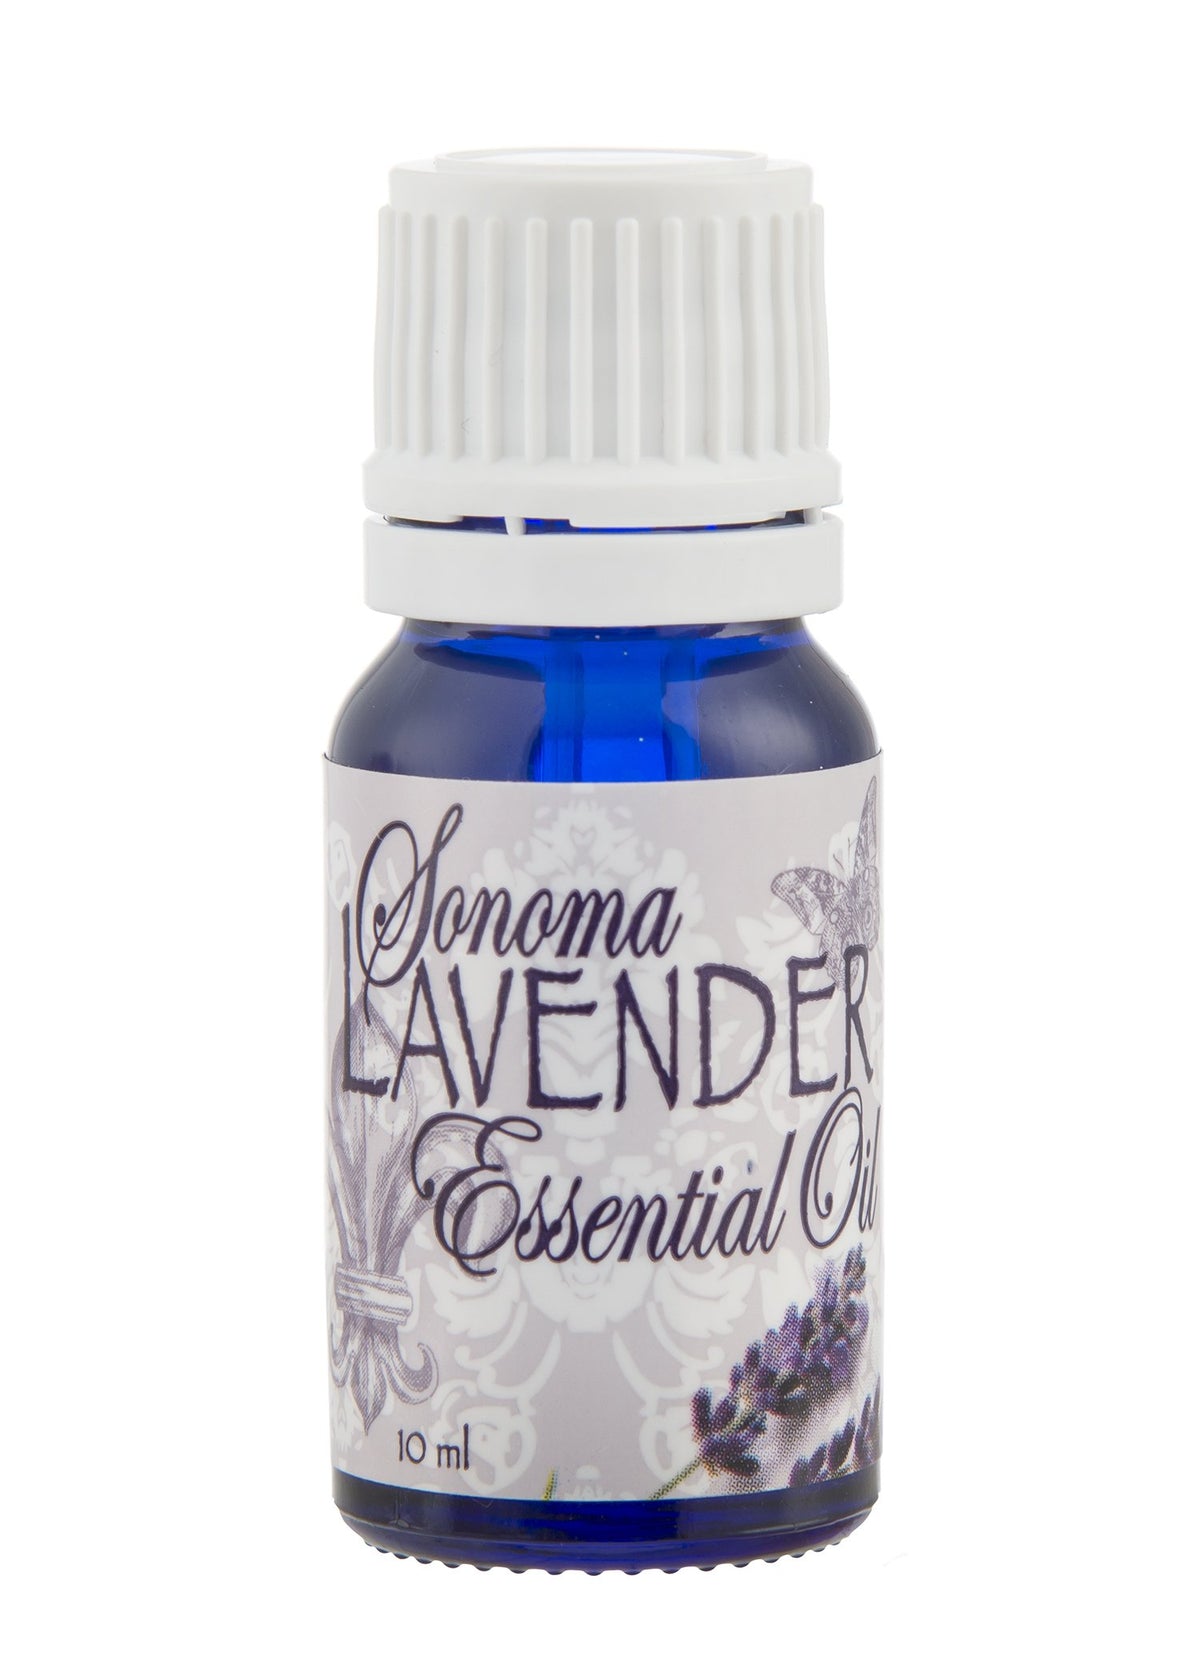 A small bottle of Sonoma Lavender Essential Oil 10ml, labeled clearly for sleep support, with a white cap and a design featuring lavender plants on the label. The container holds 10 ml of oil.